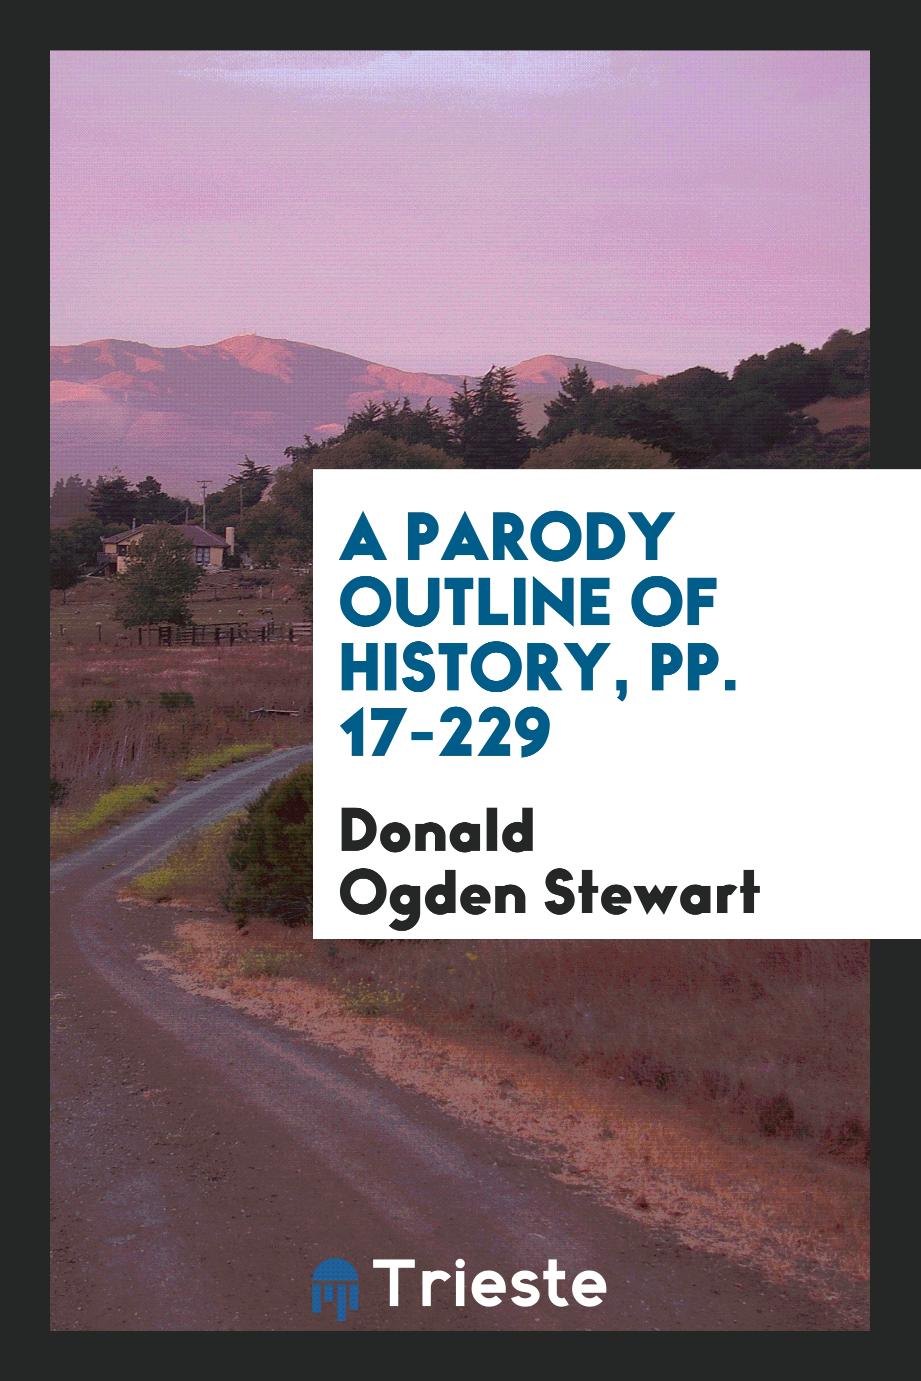 A Parody Outline of History, pp. 17-229